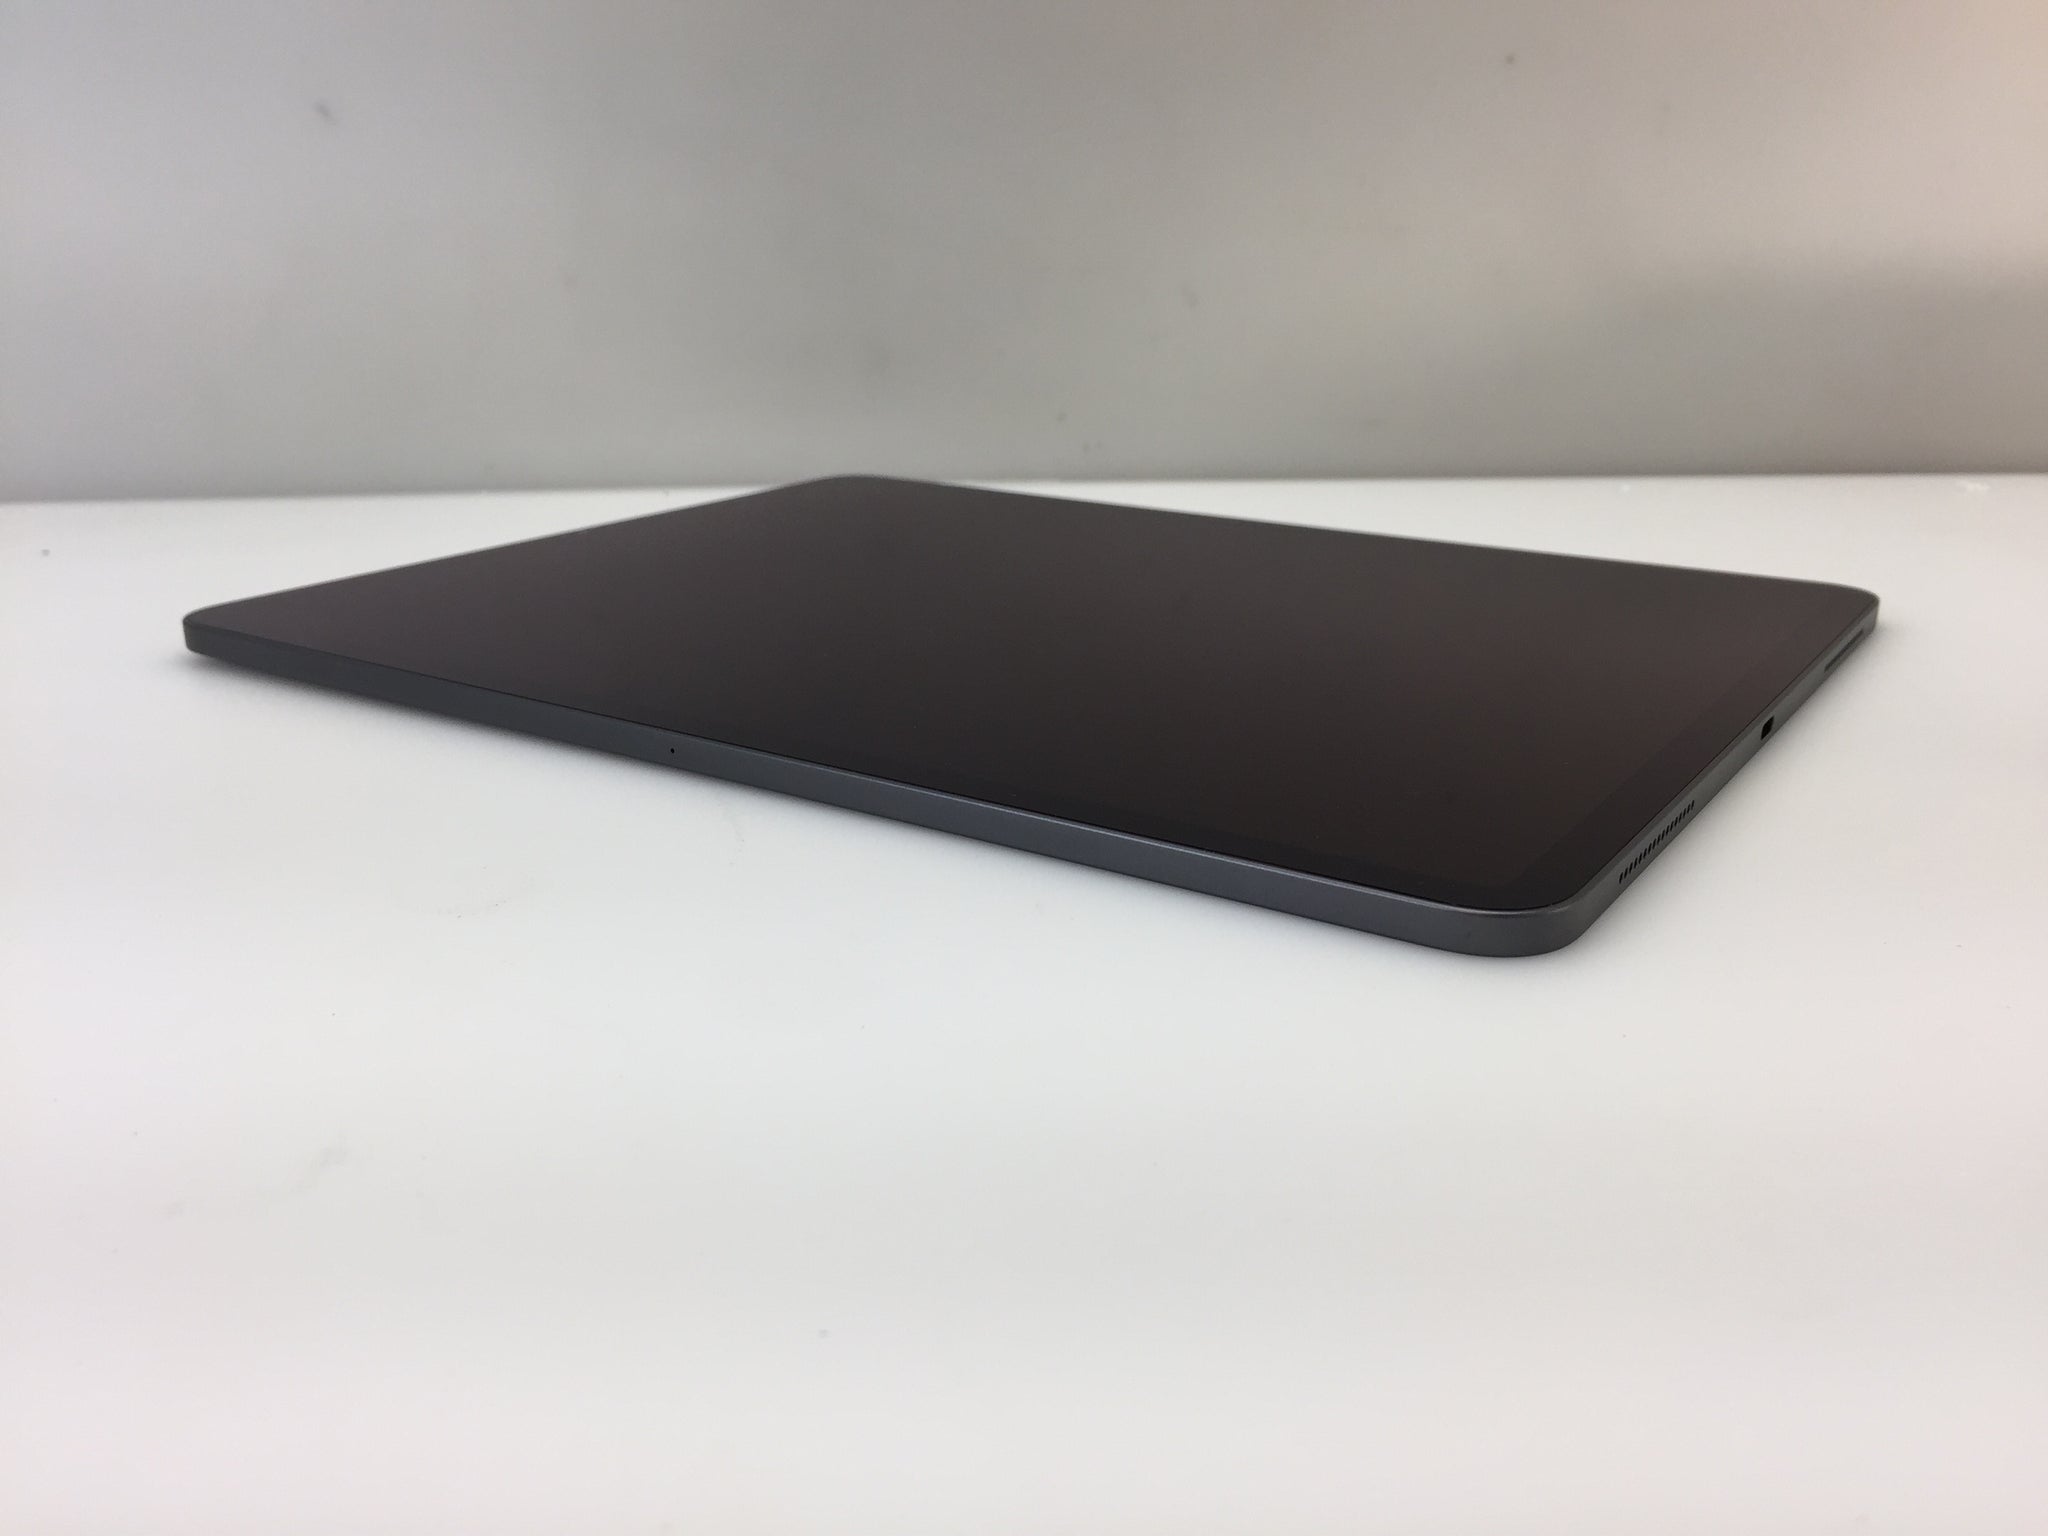  Apple iPad Pro 12.9in 64GB WiFi Only, Space Grey